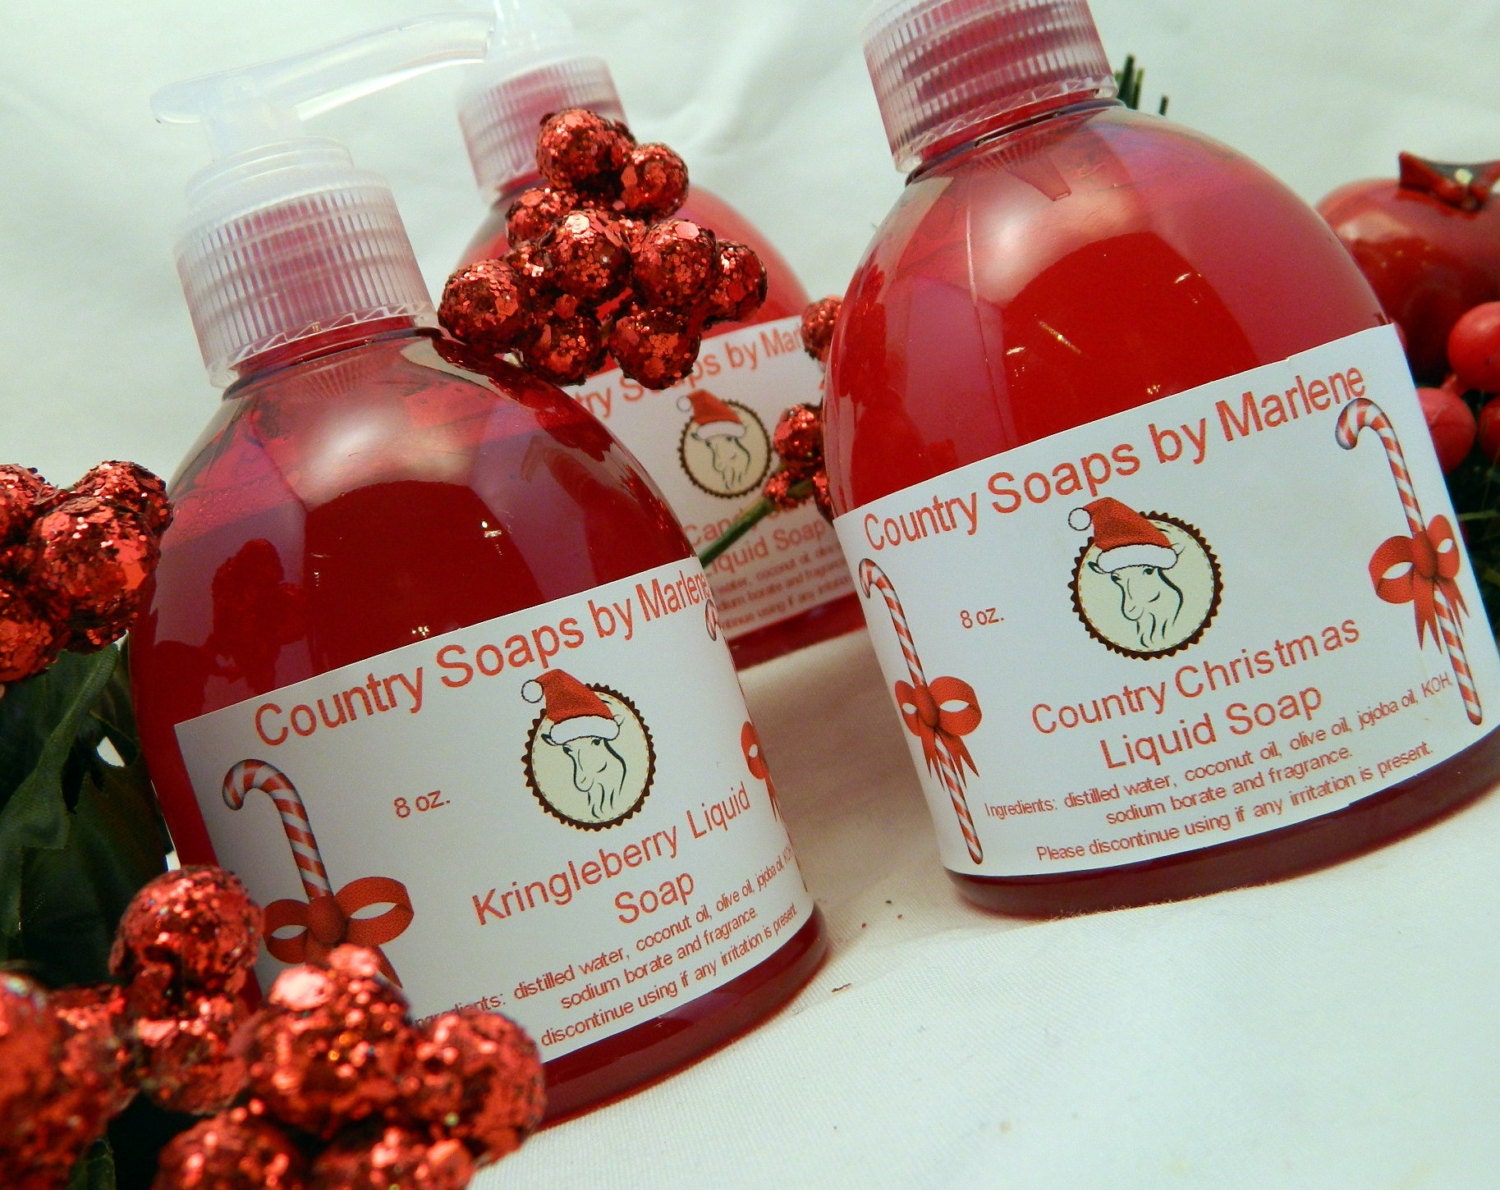 Candy Cane Liquid Hand Soap cyber mon/tues SALE - countrysoapsbymarlen